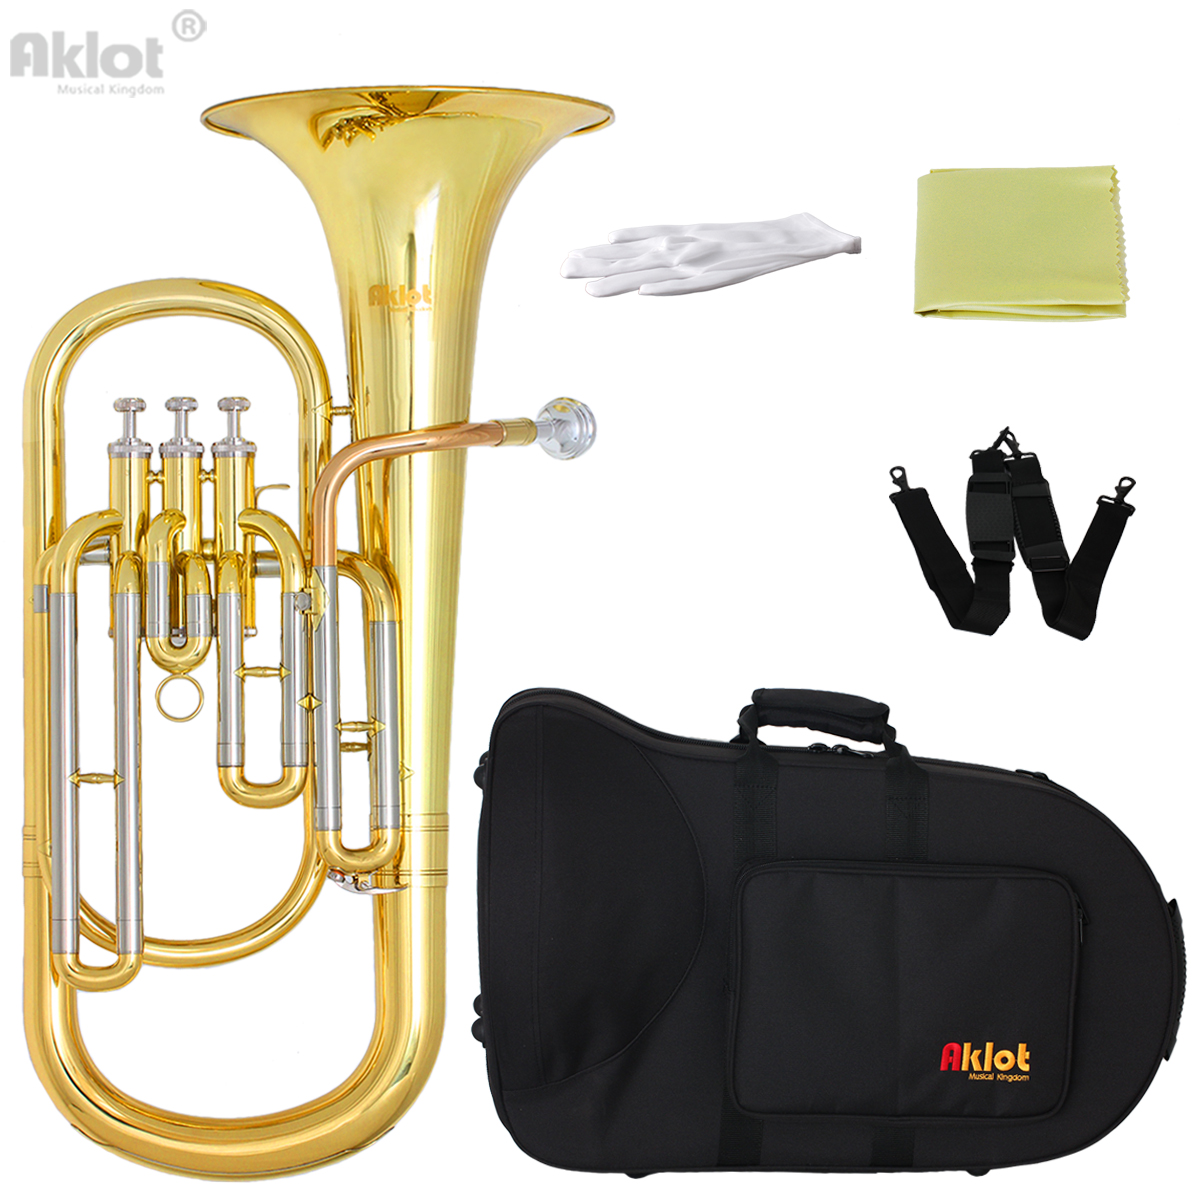 Aklot Professional Bb Baritone Horn Cupronickel Tuning Pipe Gold Brass Leadpipe Silver Plated Mouthpiece Gold Lacquered 